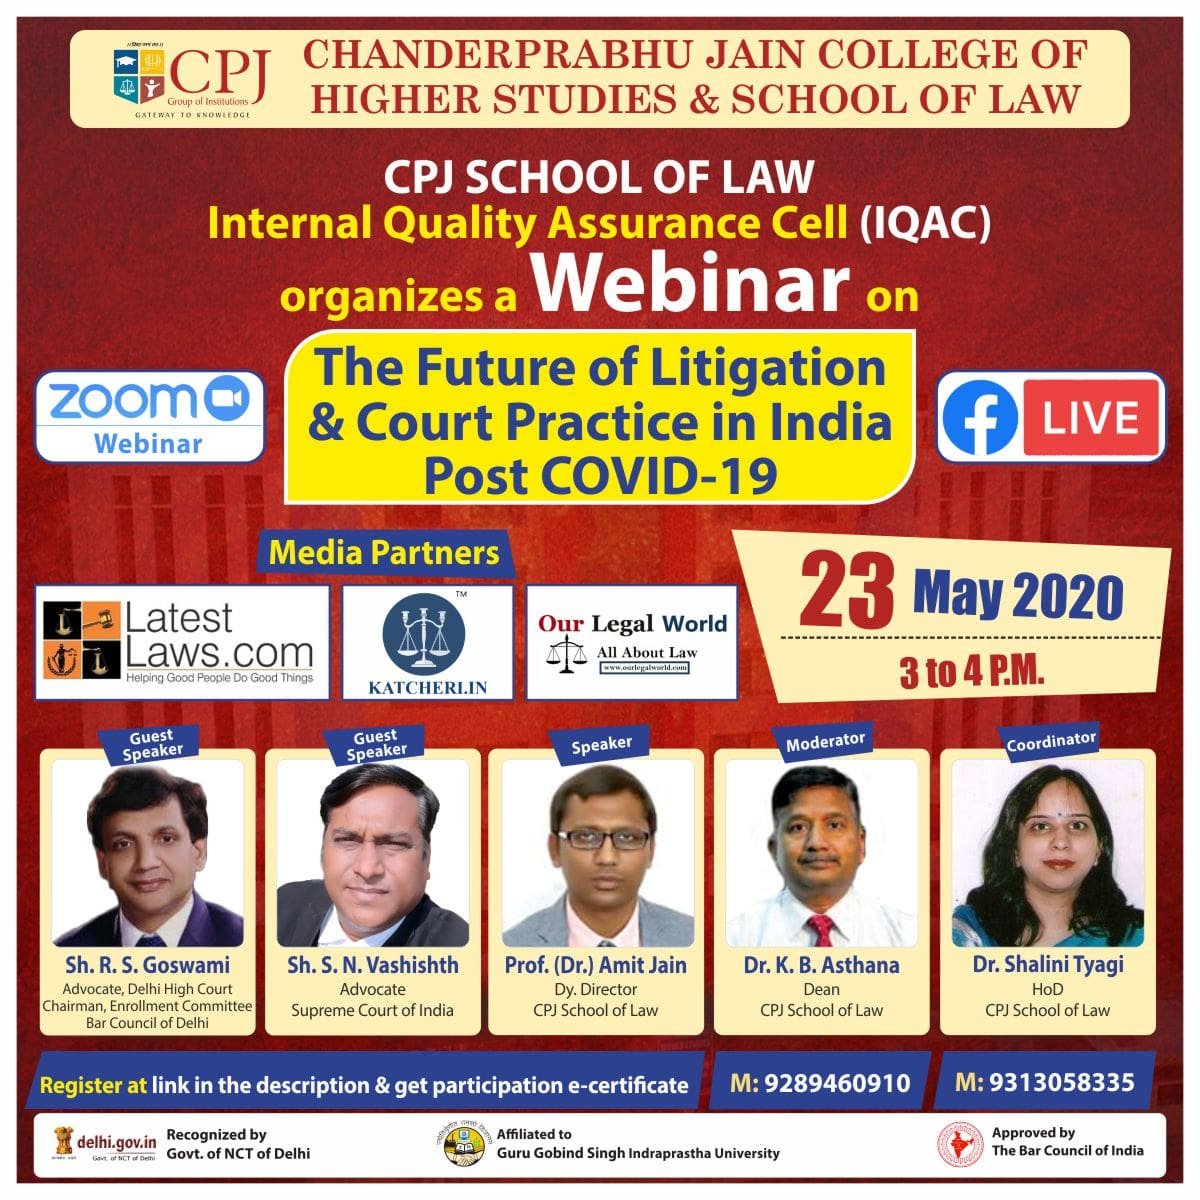 Webinar on The Future of Litigation & Court Practice in India Post COVID-19